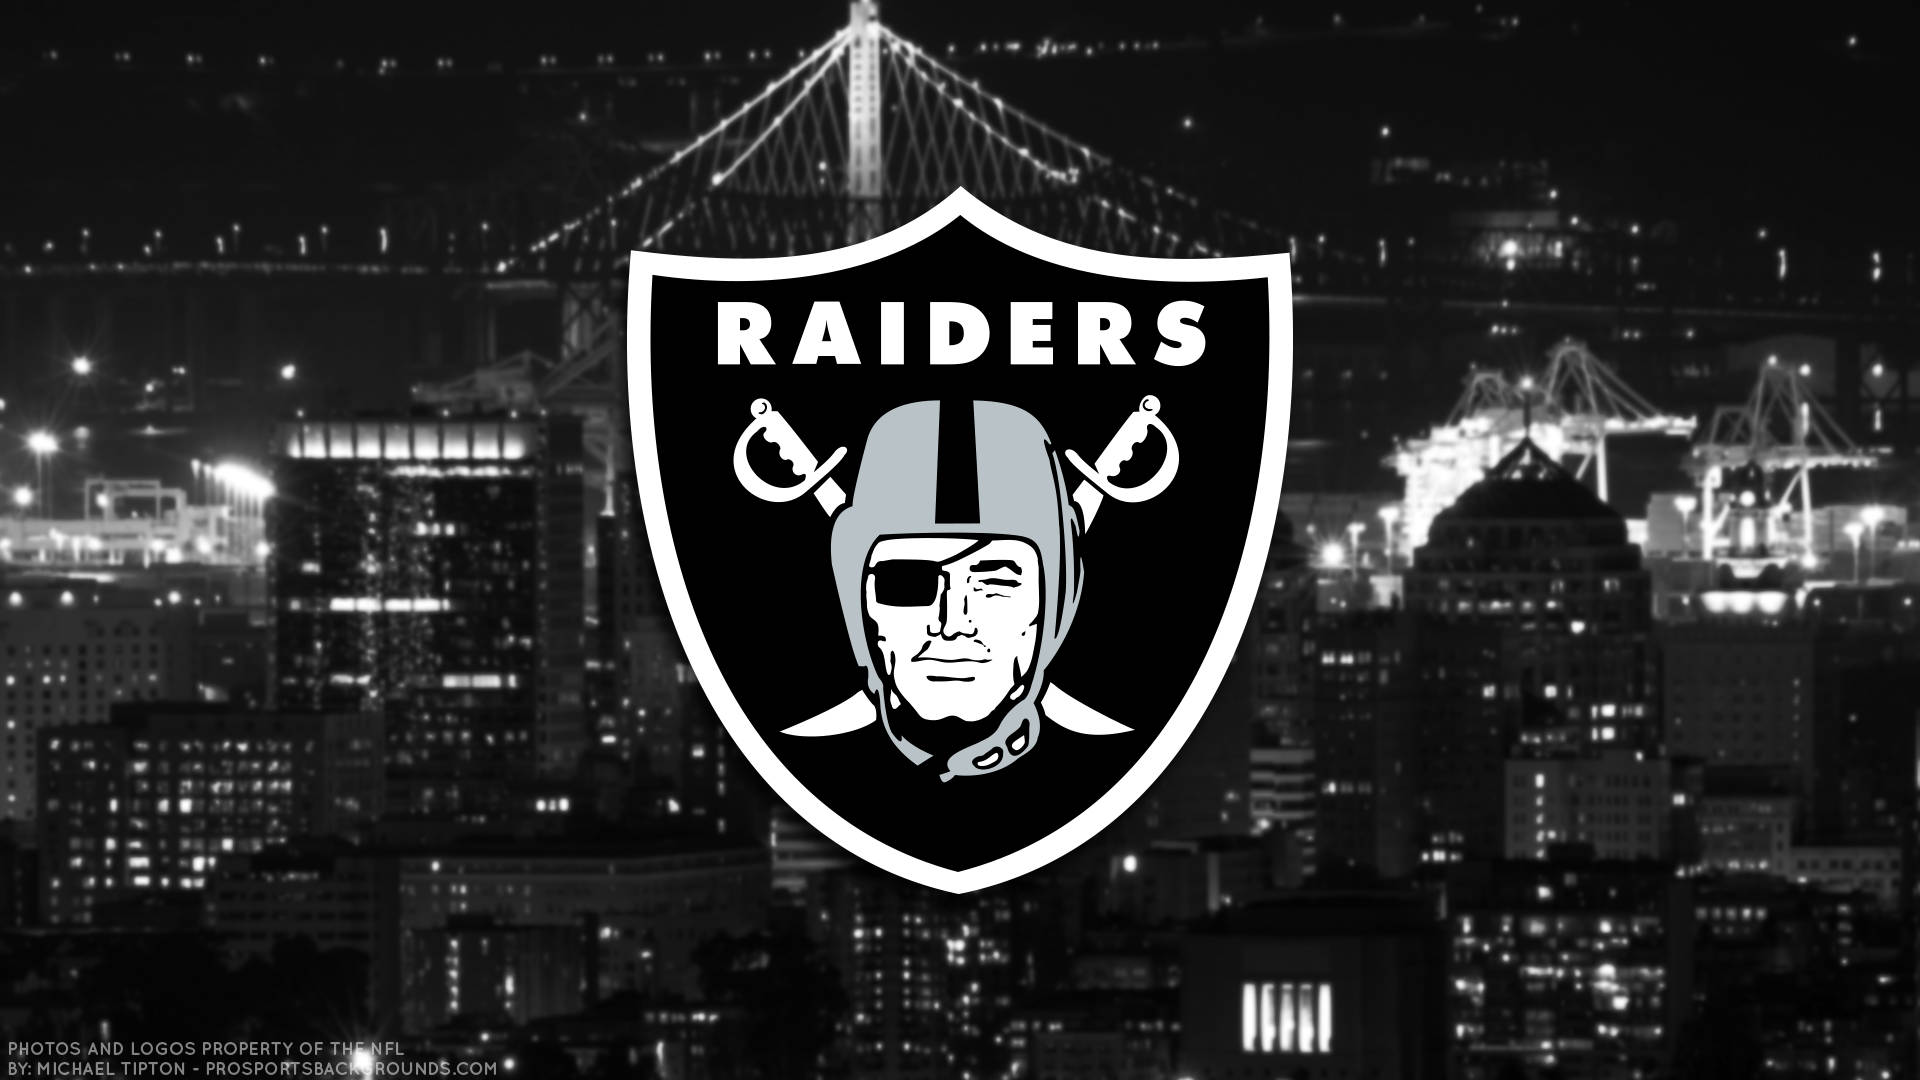 Oakland Raiders Logo On City Buildings Background